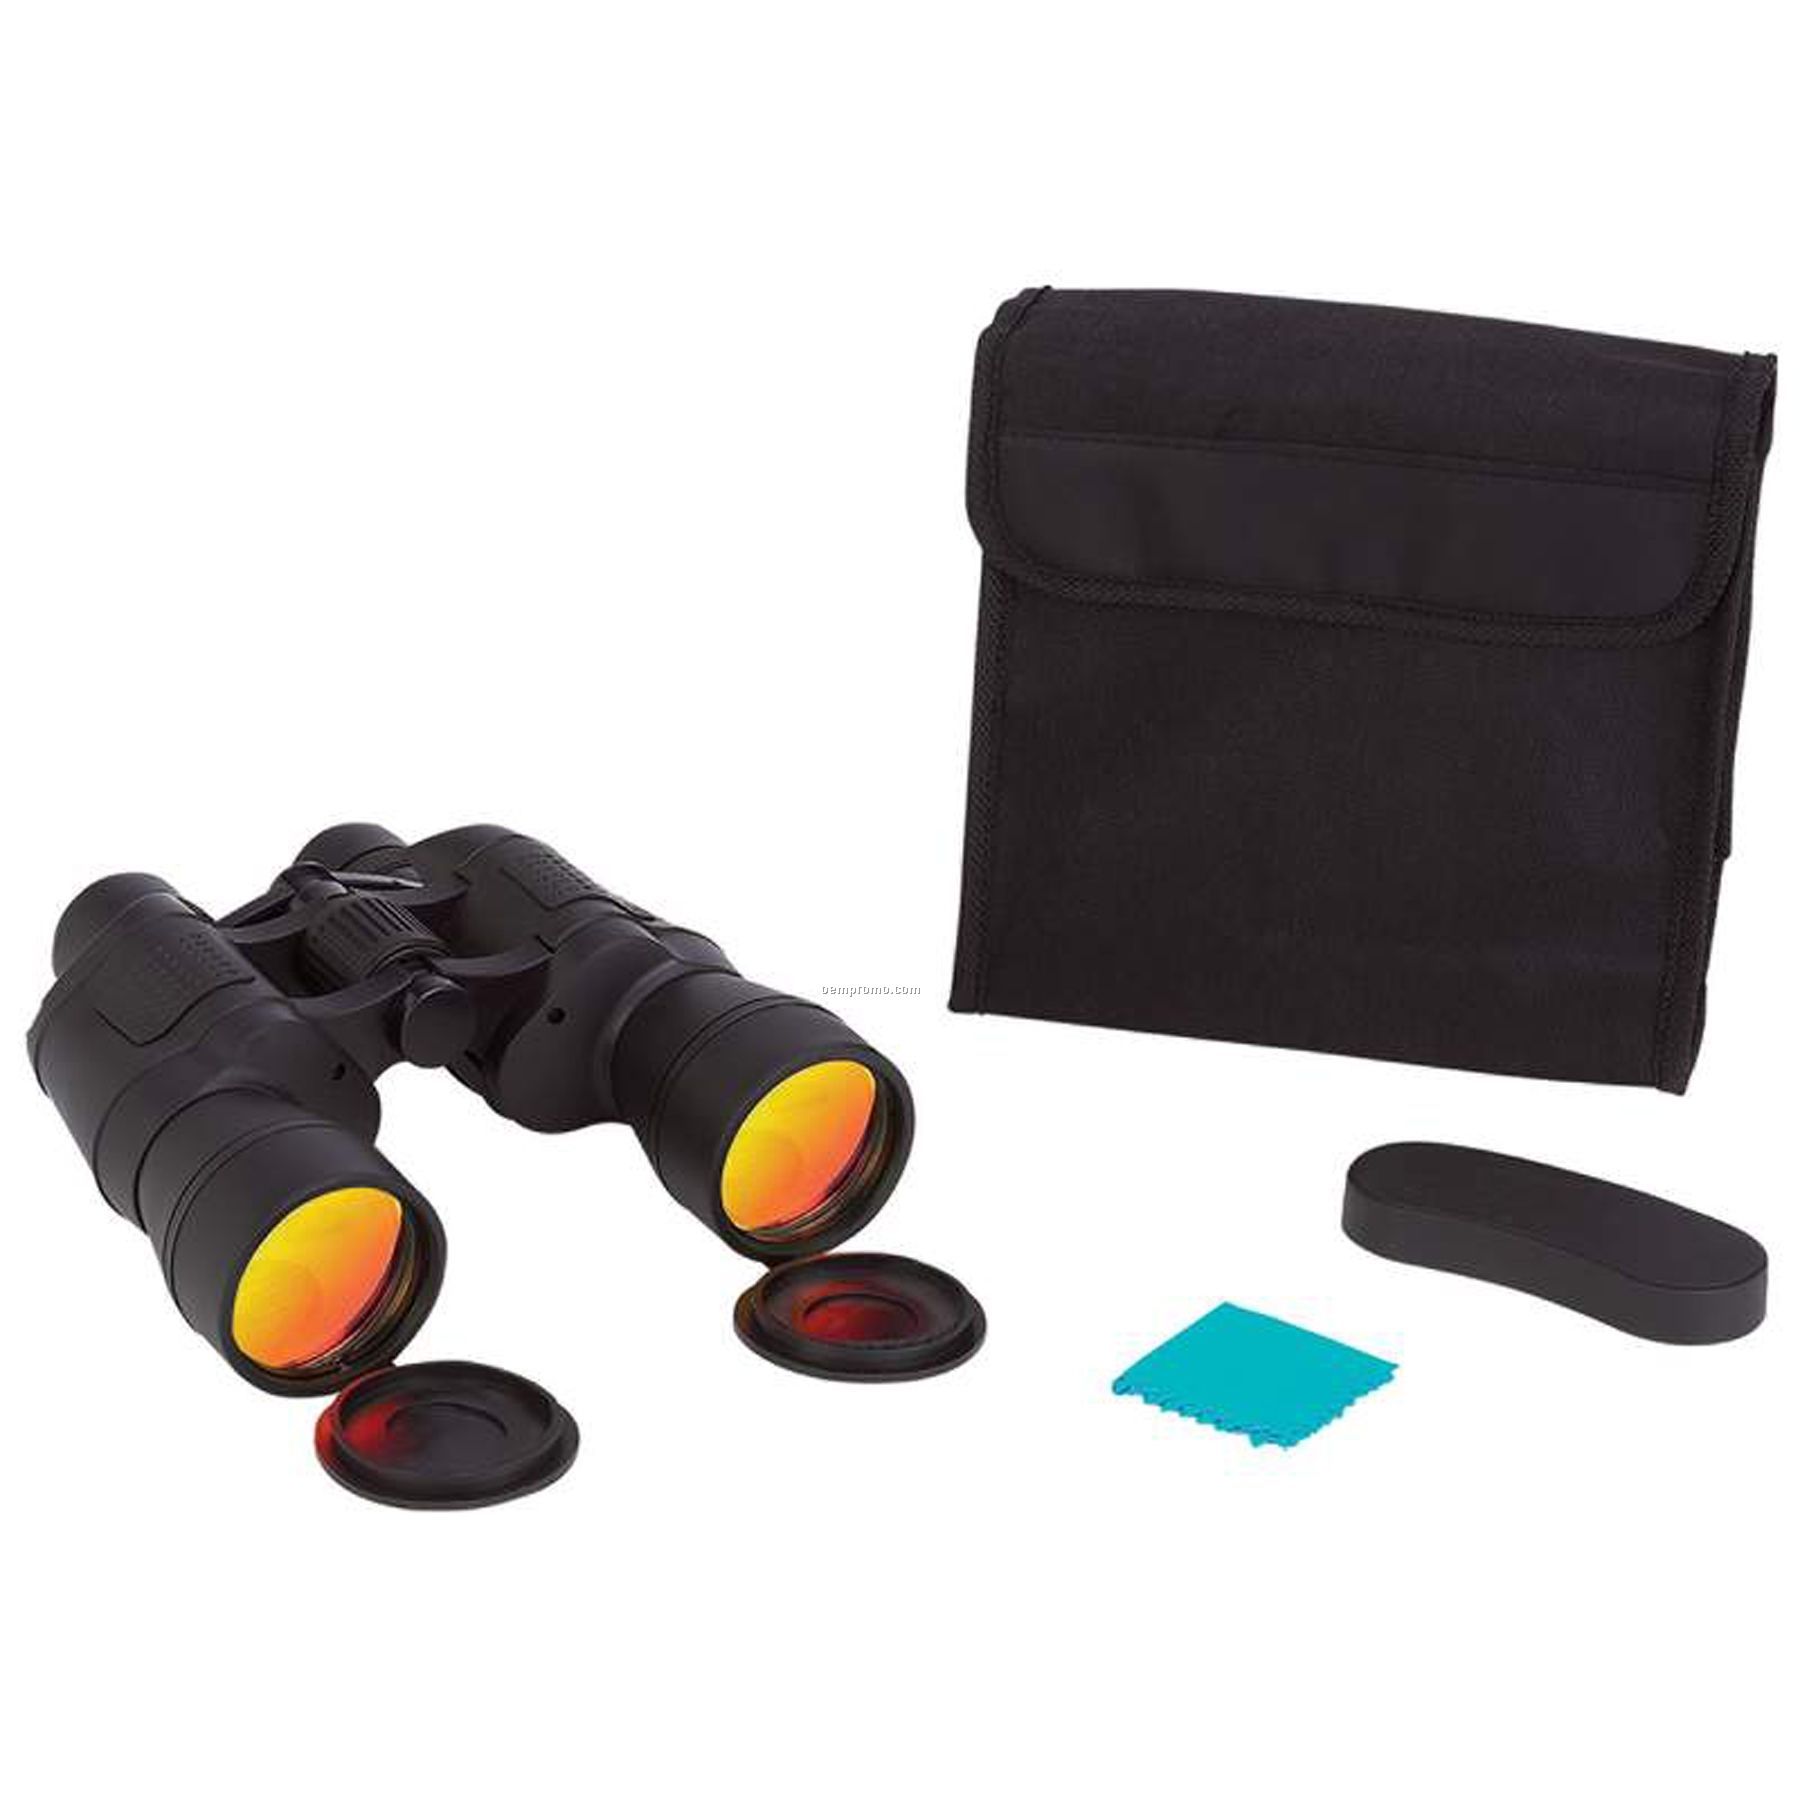 10x50 High Powered Binoculars W/ Ruby Red Coated Lenses For Glare Reduction